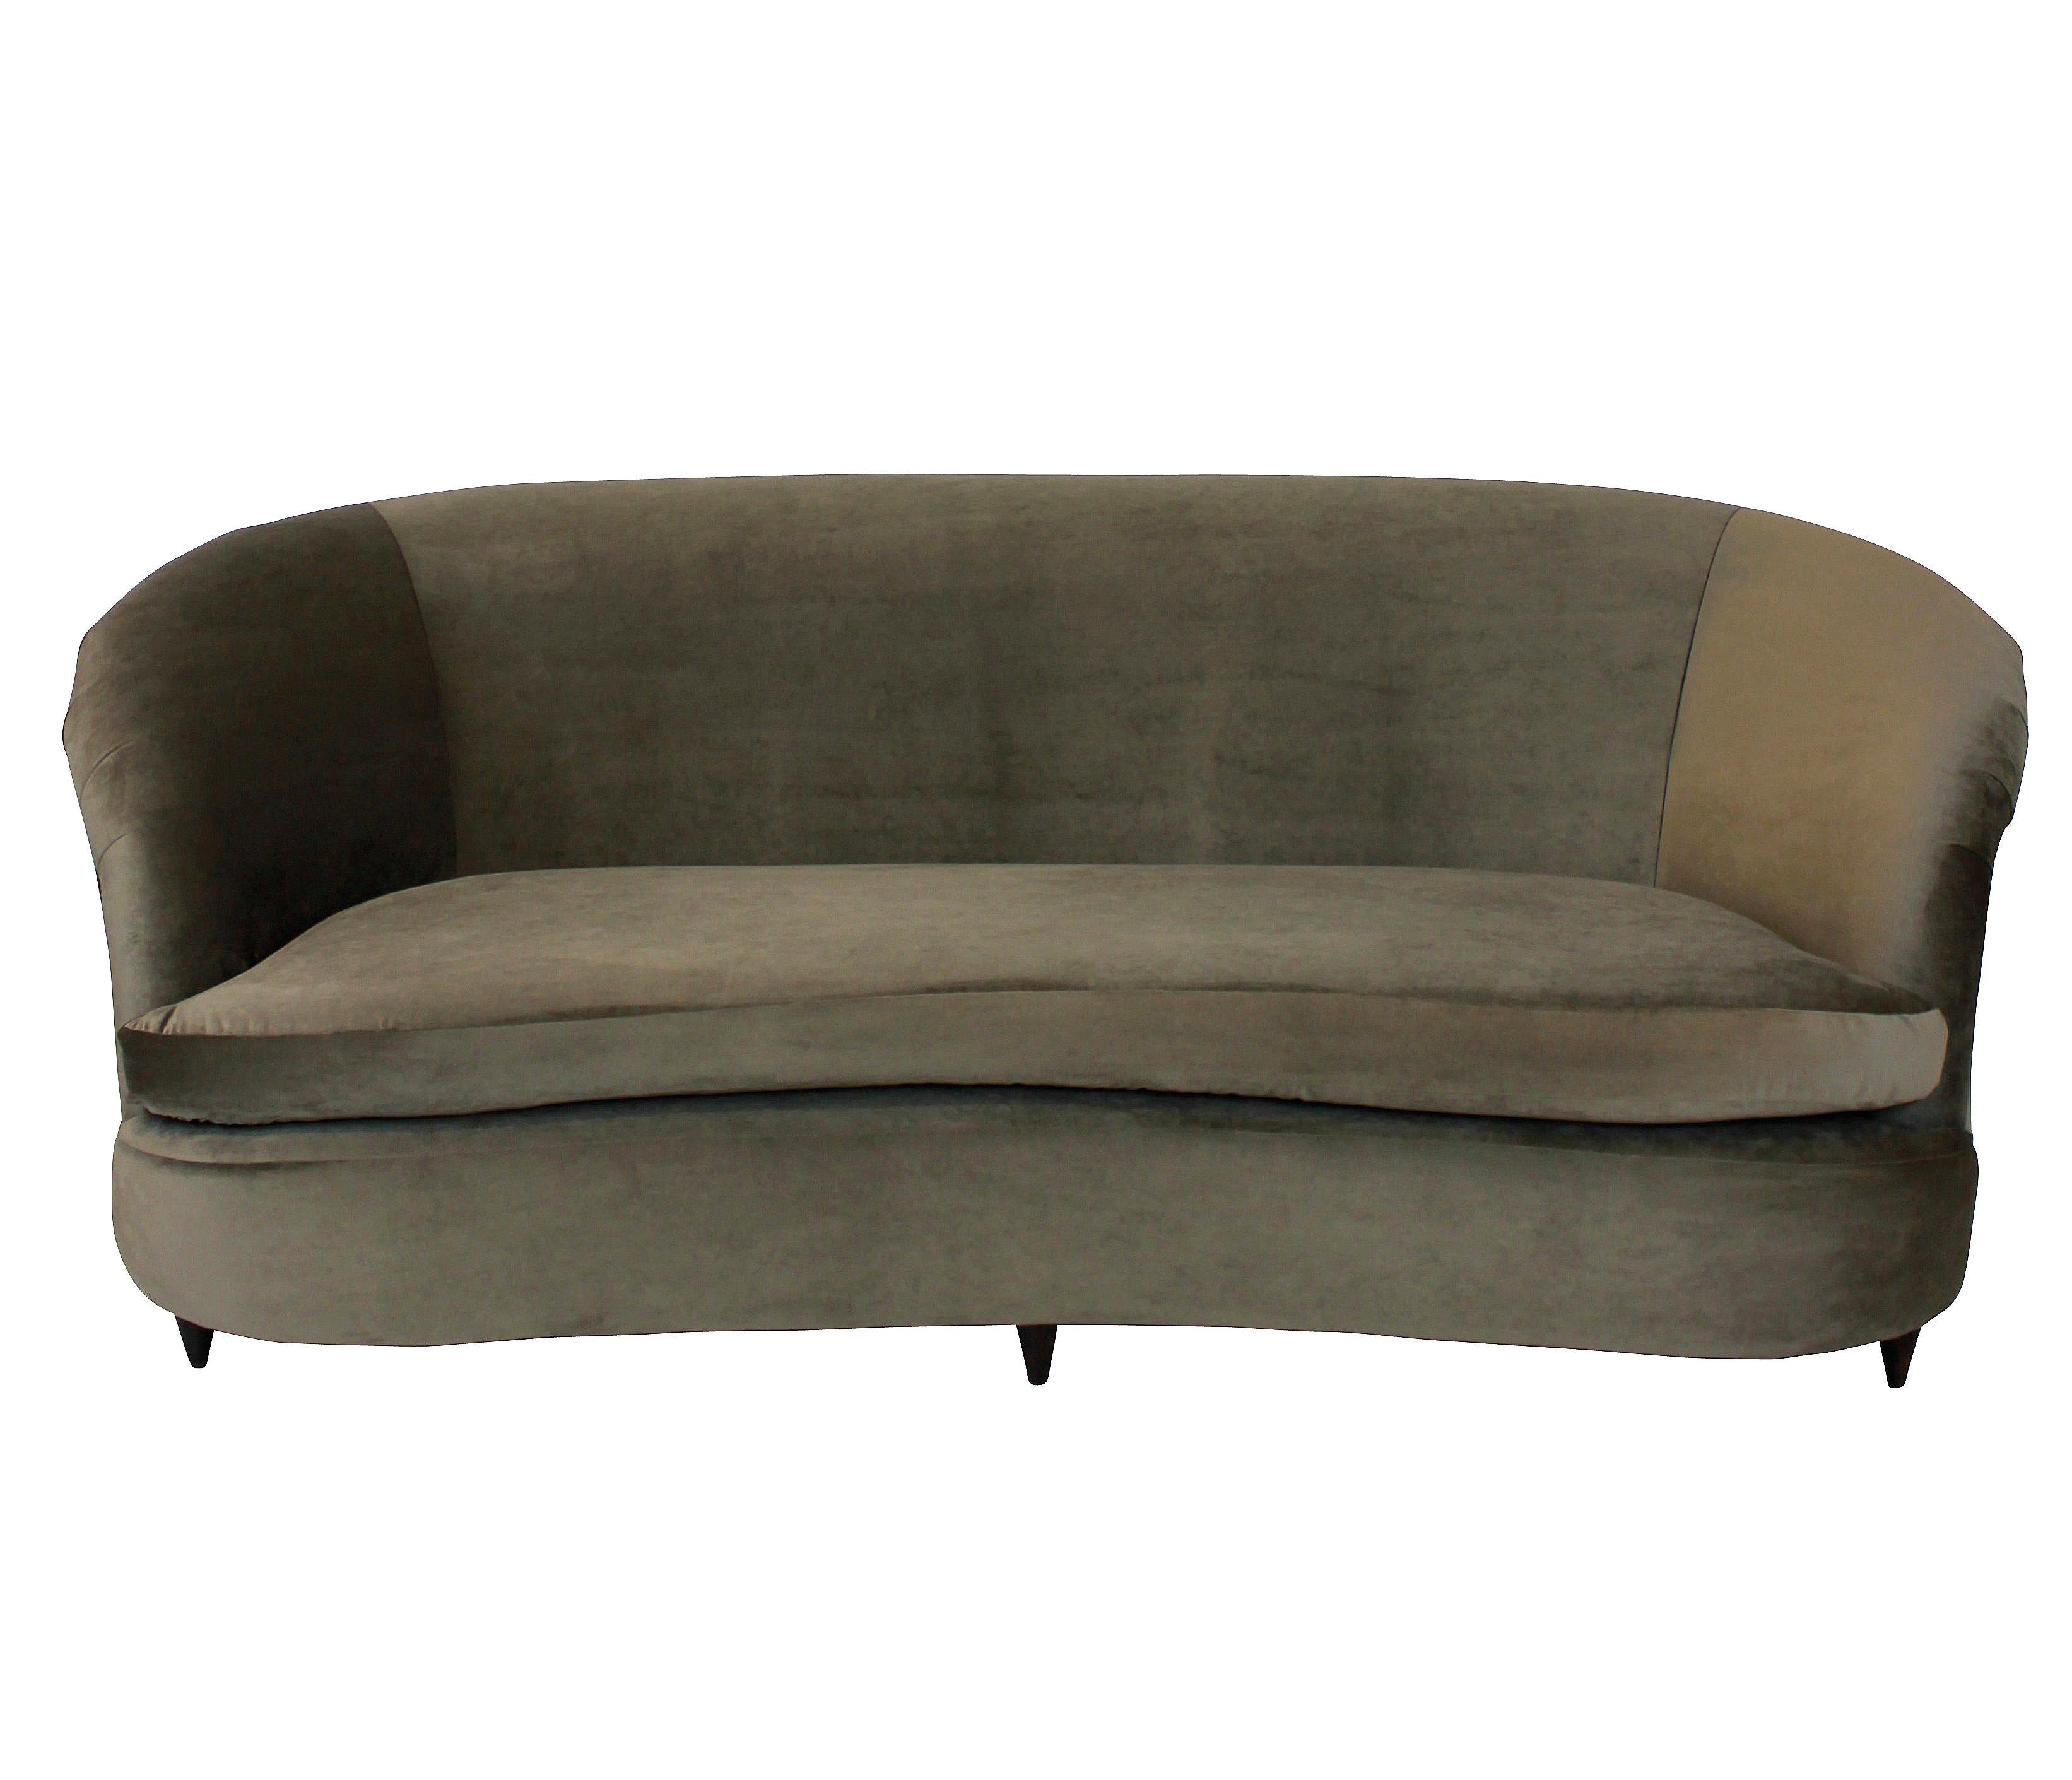 A large three-seat, extremely comfortable sculptural settee by Parisi, with swab cushion and newly upholstered in mole velvet.

   